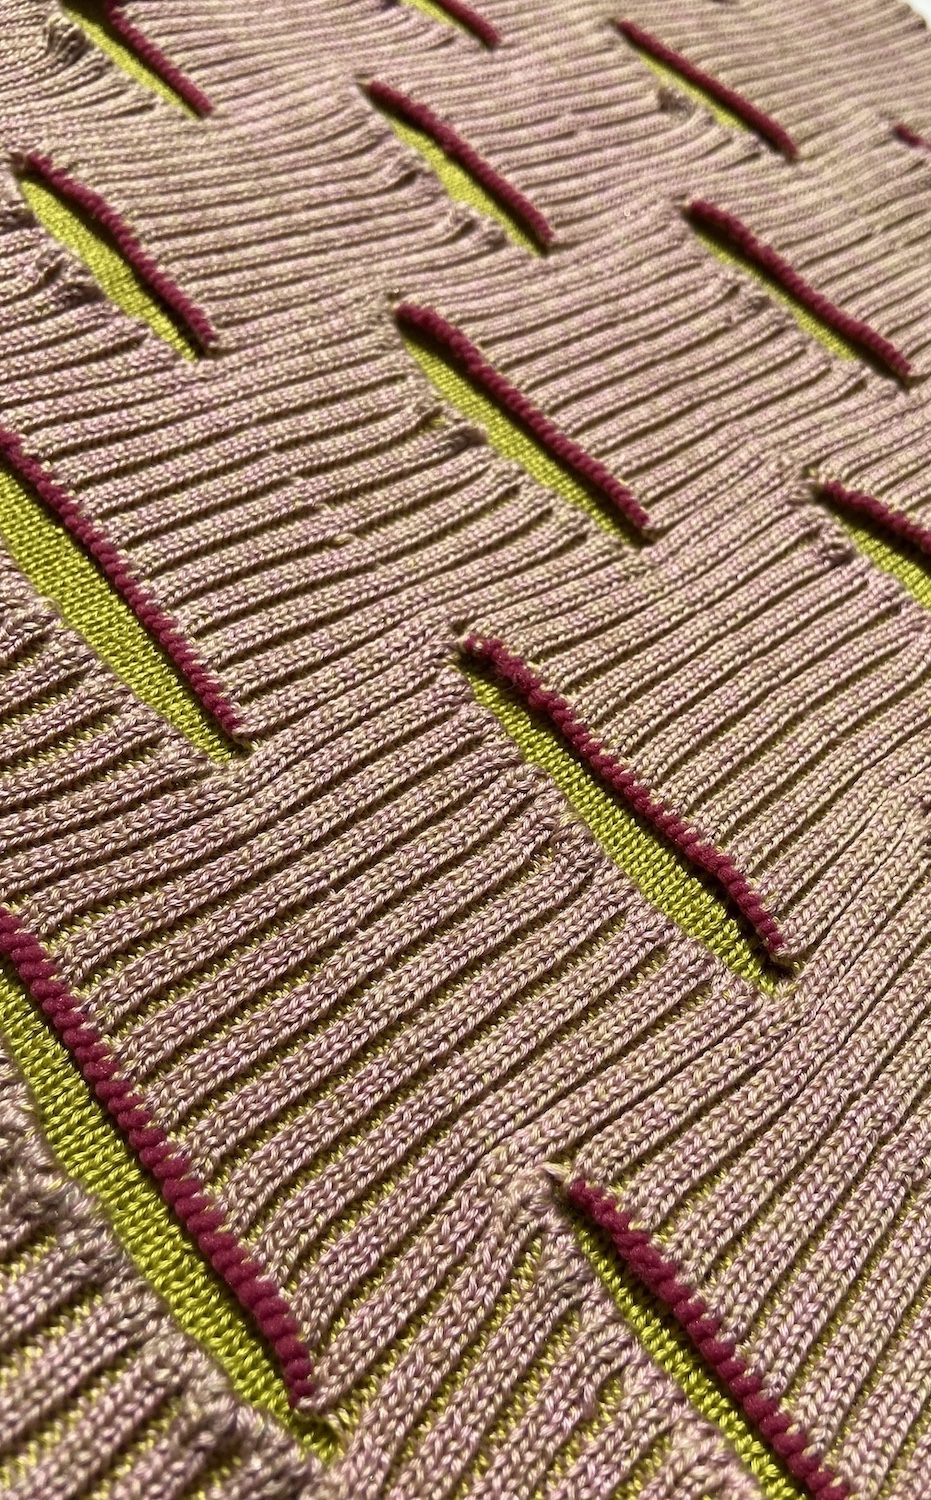 Knitted Textiles Sample